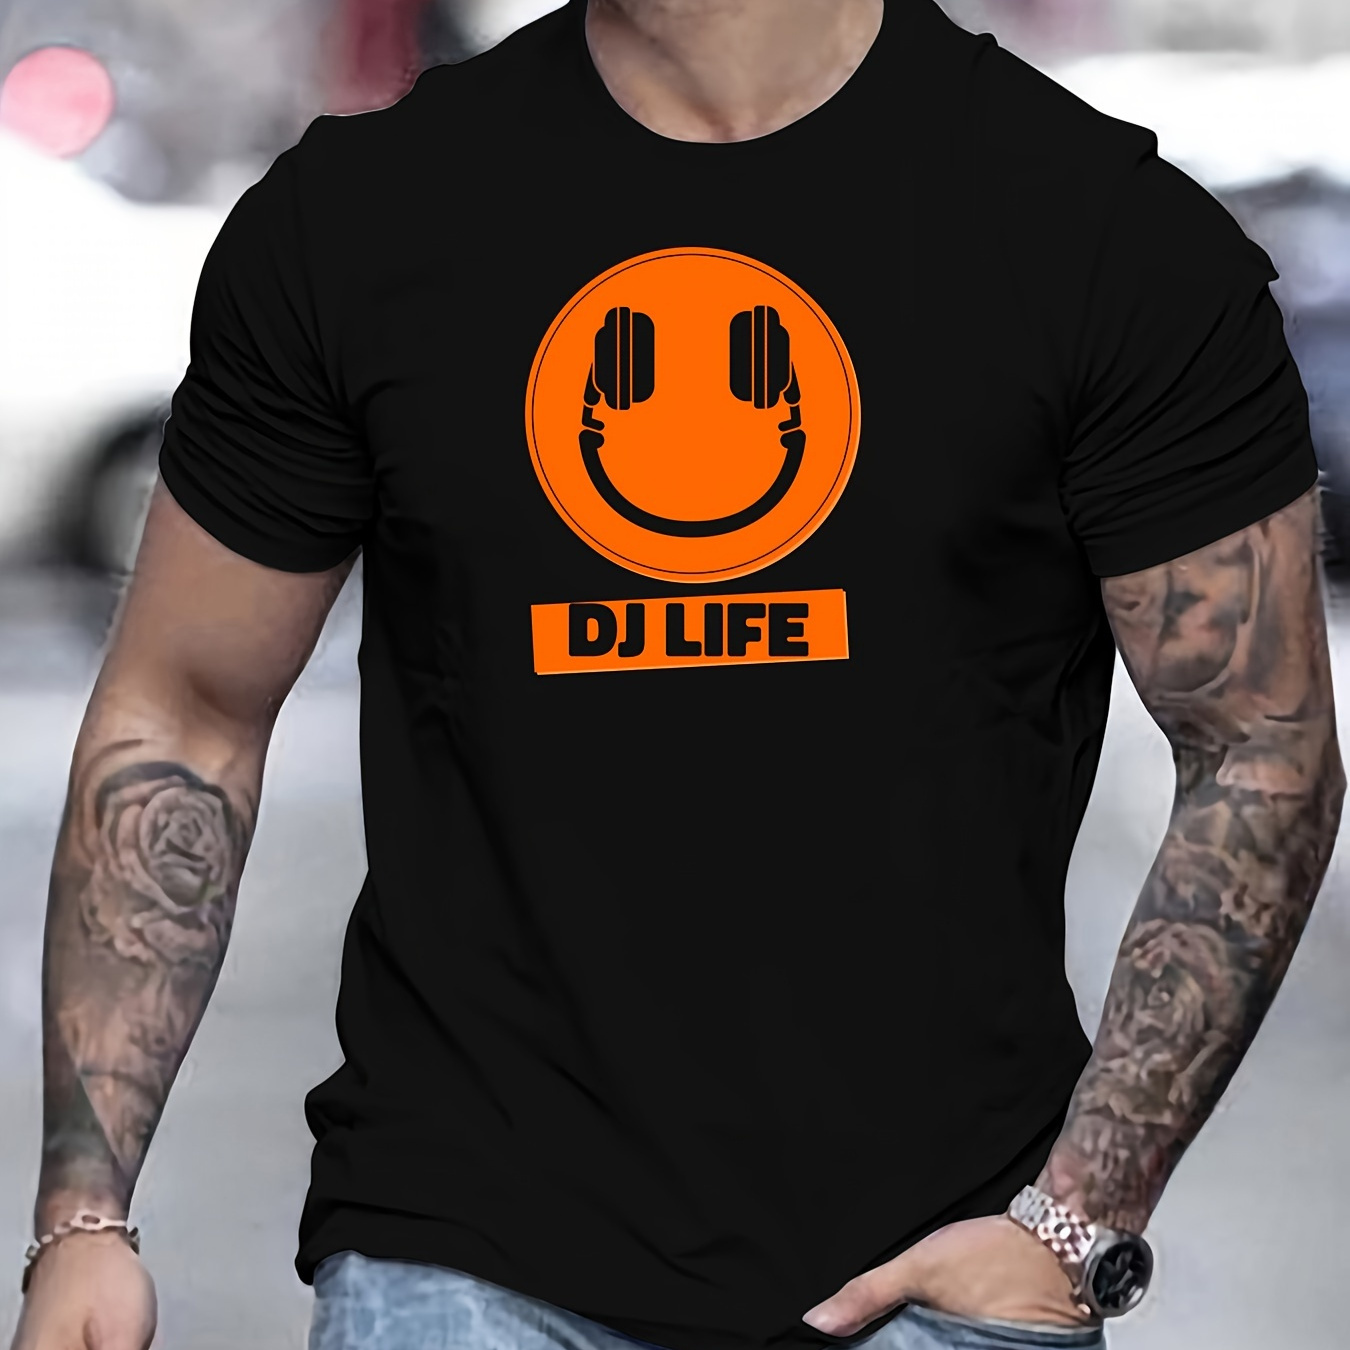 

Dj Life & Happy Face Pattern Print Crew Neck Short Sleeve T-shirt For Men, Comfy Casual Summer T-shirt For Daily Wear Work Out And Vacation Resorts